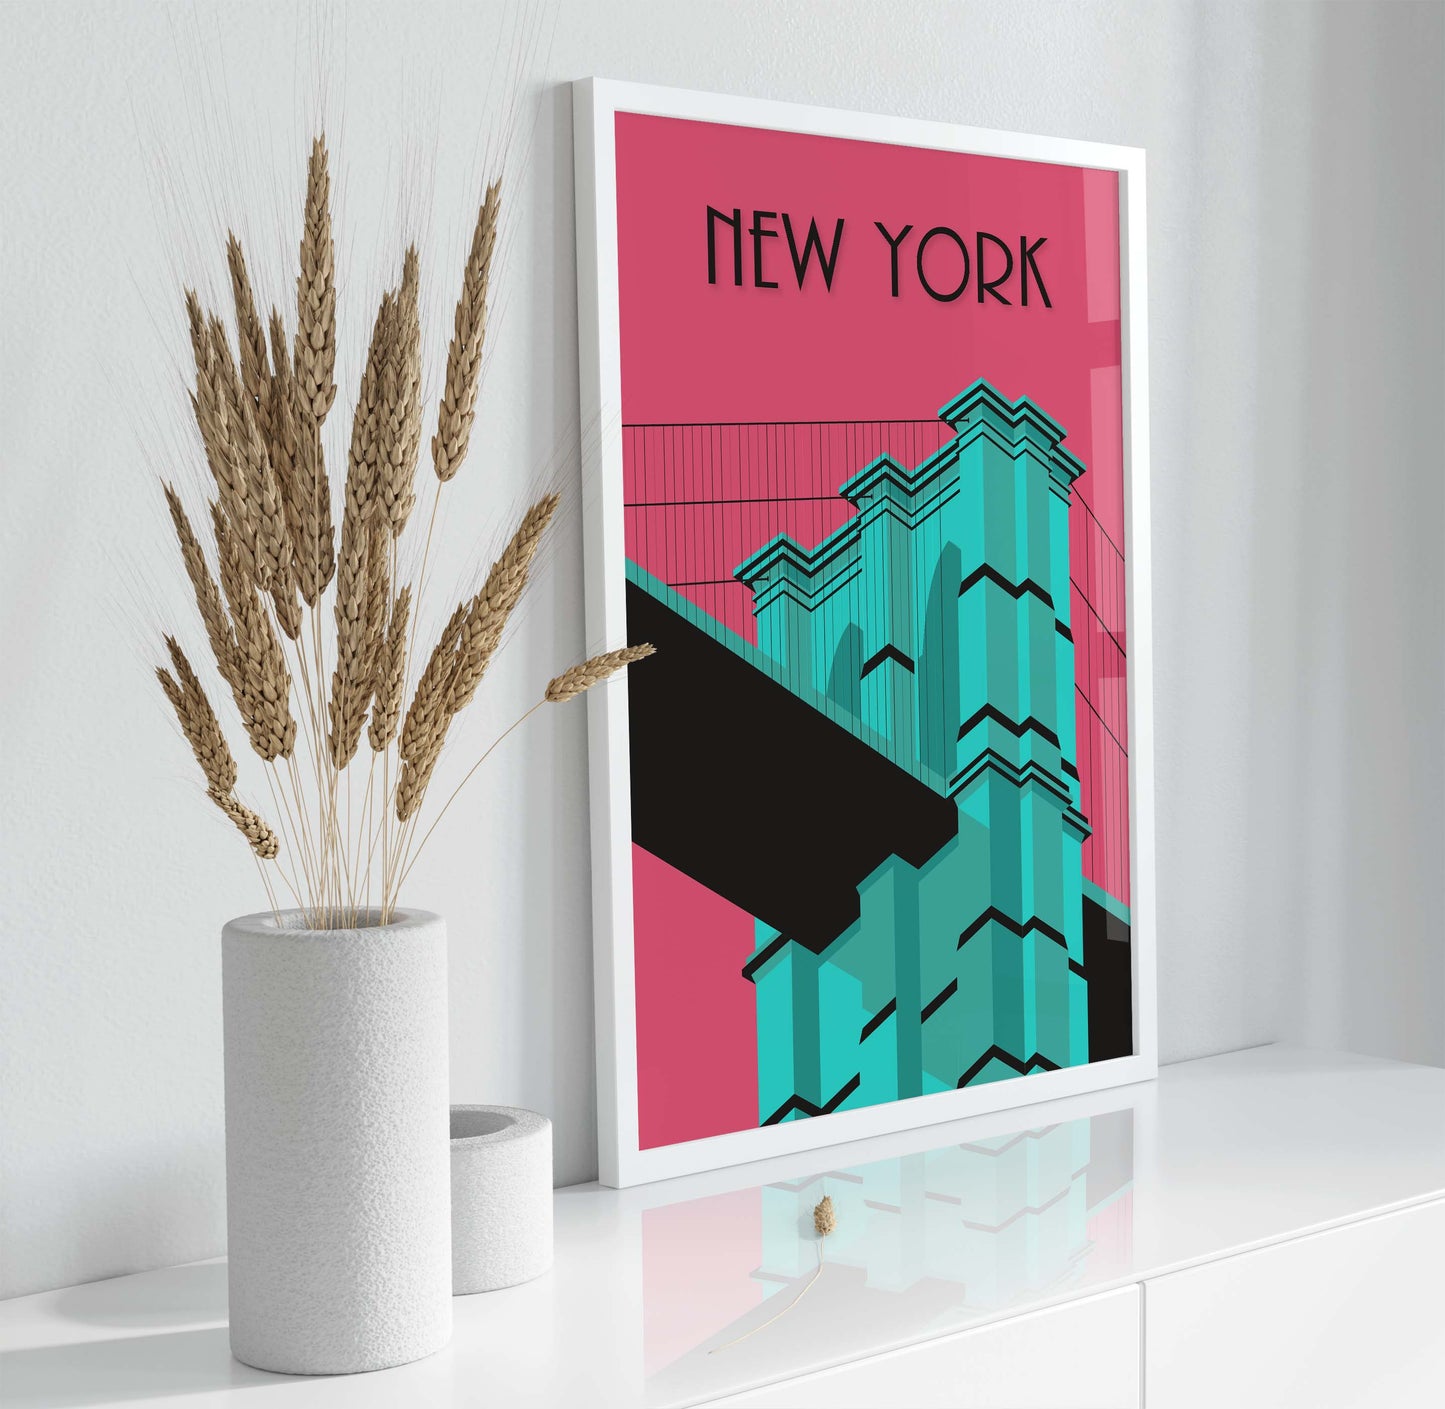 New York poster with the Brooklyn Bridge in a colourful pink and blue. With an art deco style